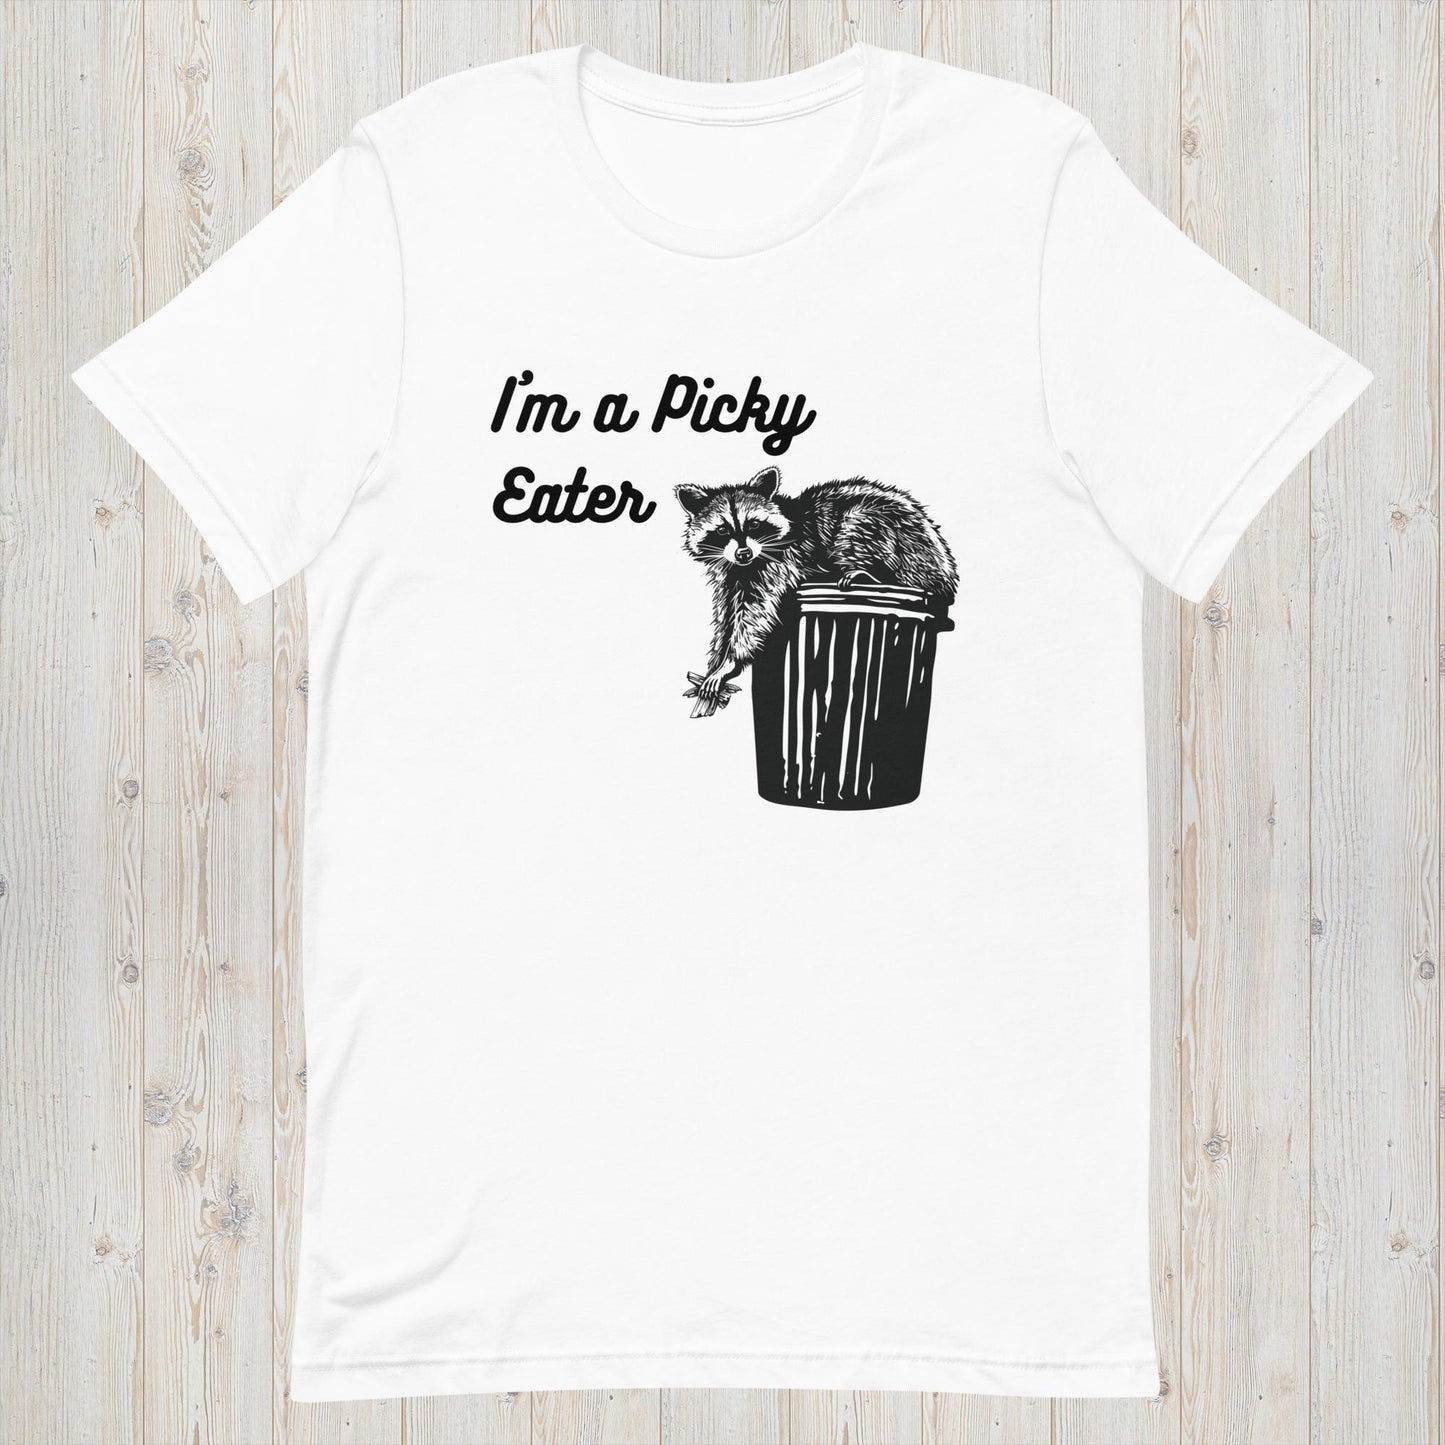 I'm a Picky Eater - Foodie Raccoon Graphic Tee Light Colors